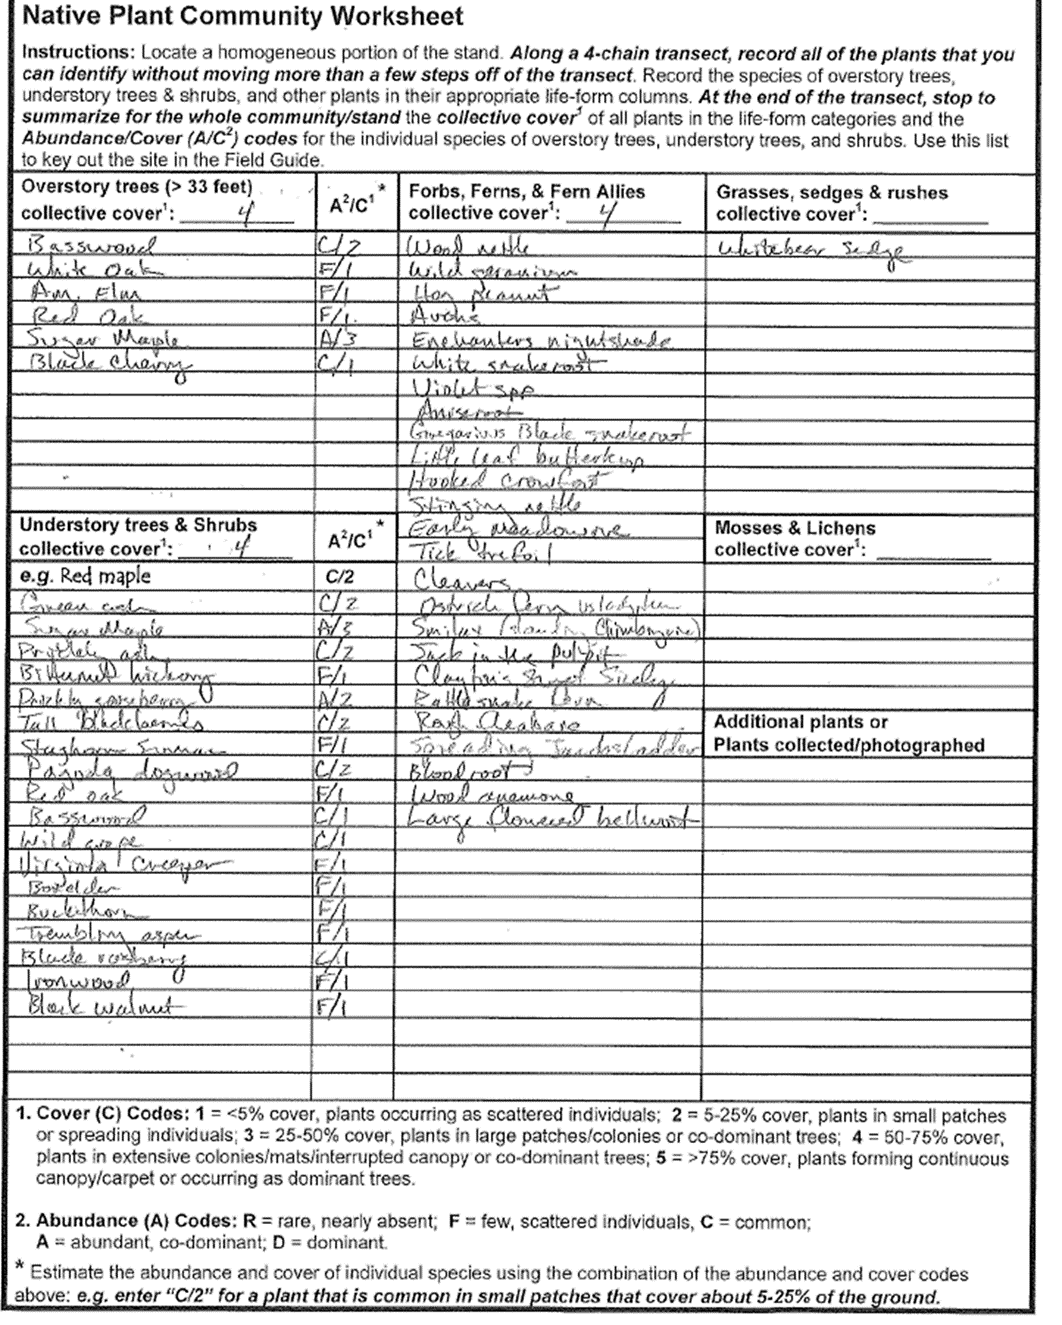 ECS Site Classification Worksheet – Page 2 with Plant List